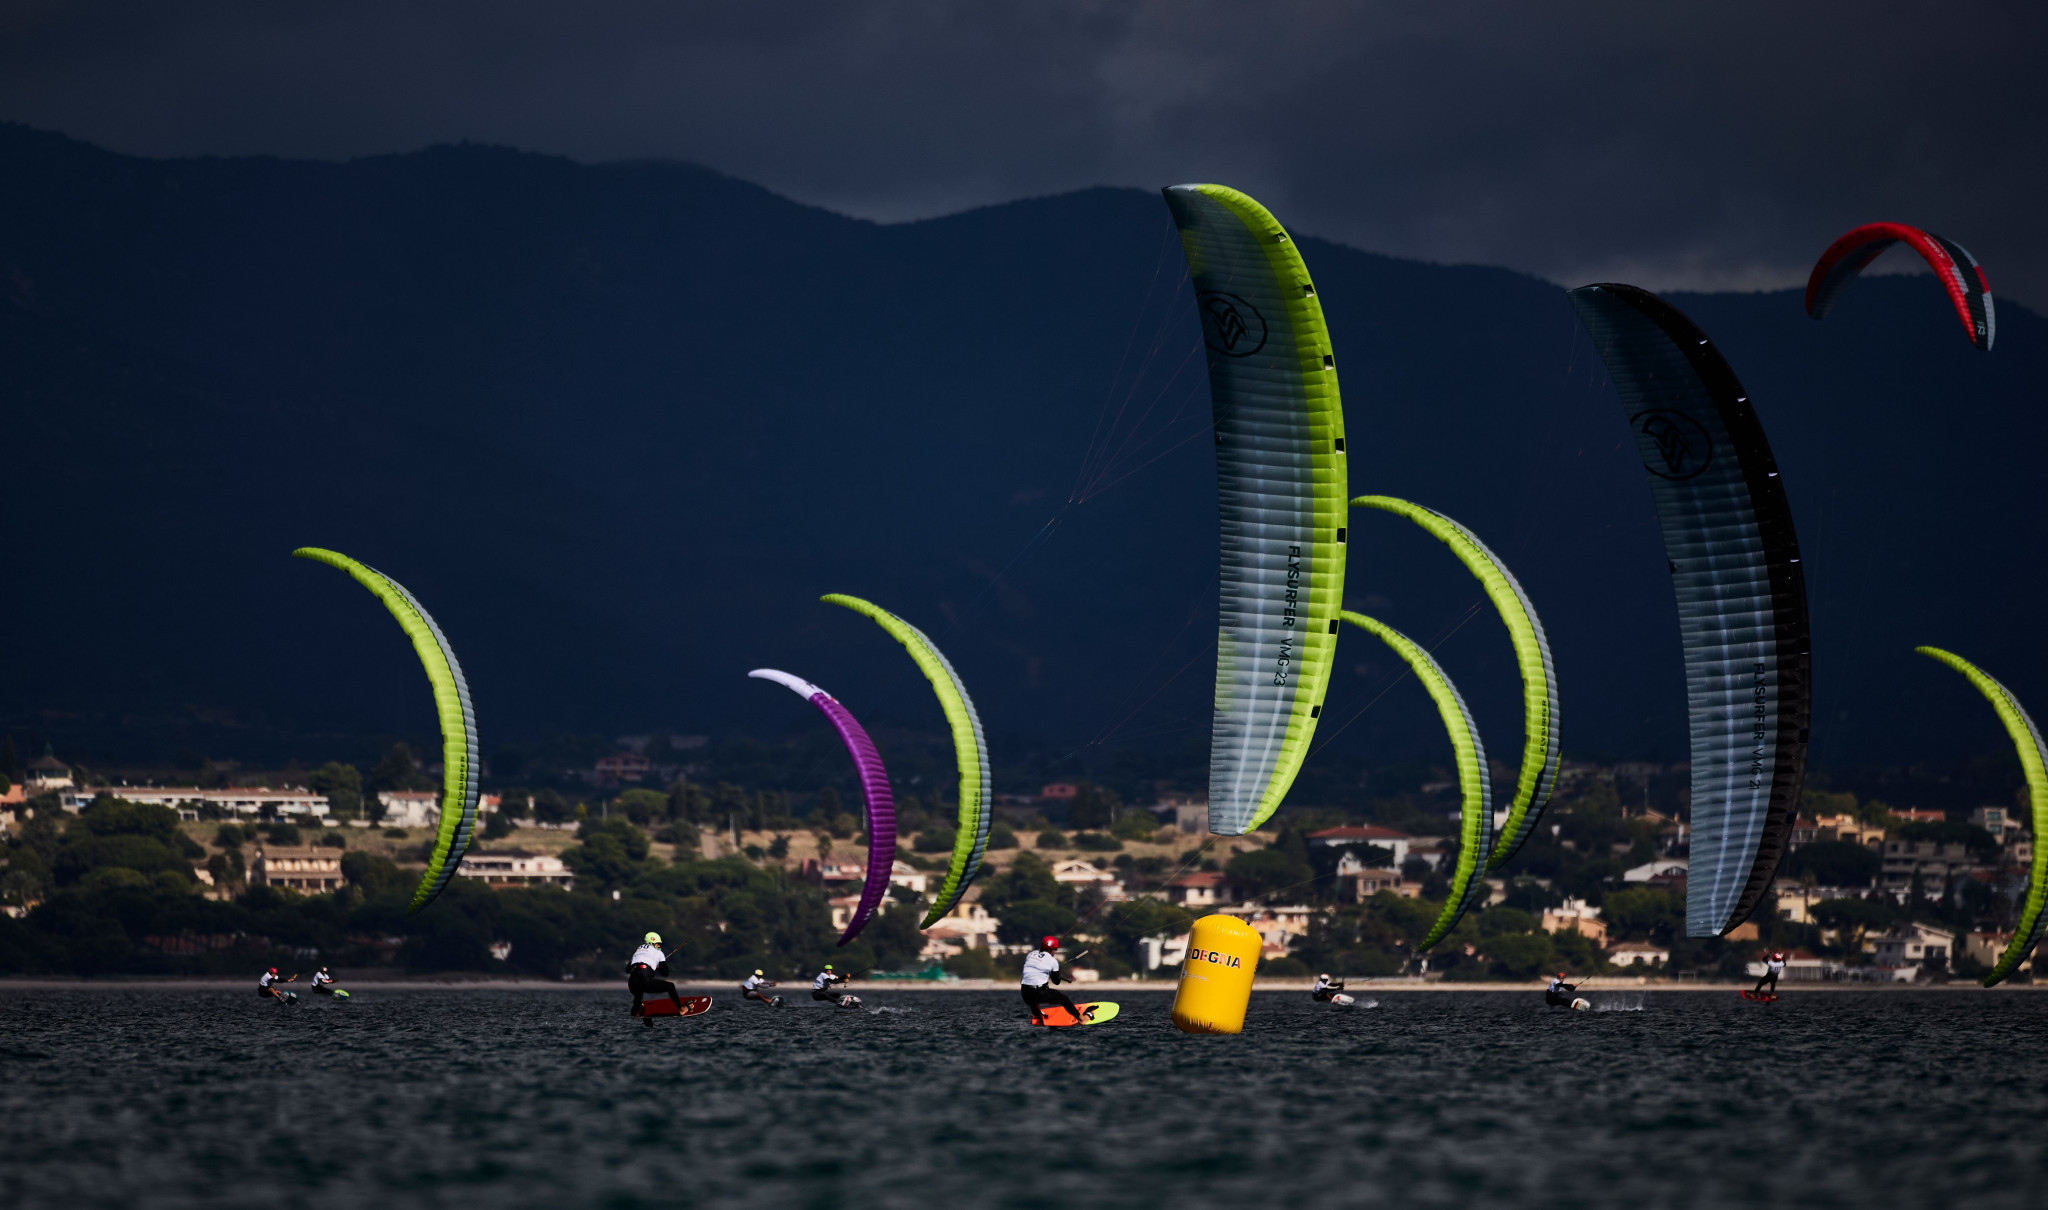 Racing resumed at the Formula Kite World Championships after yesterday's action was postponed due to bad weather ©Formula Kite